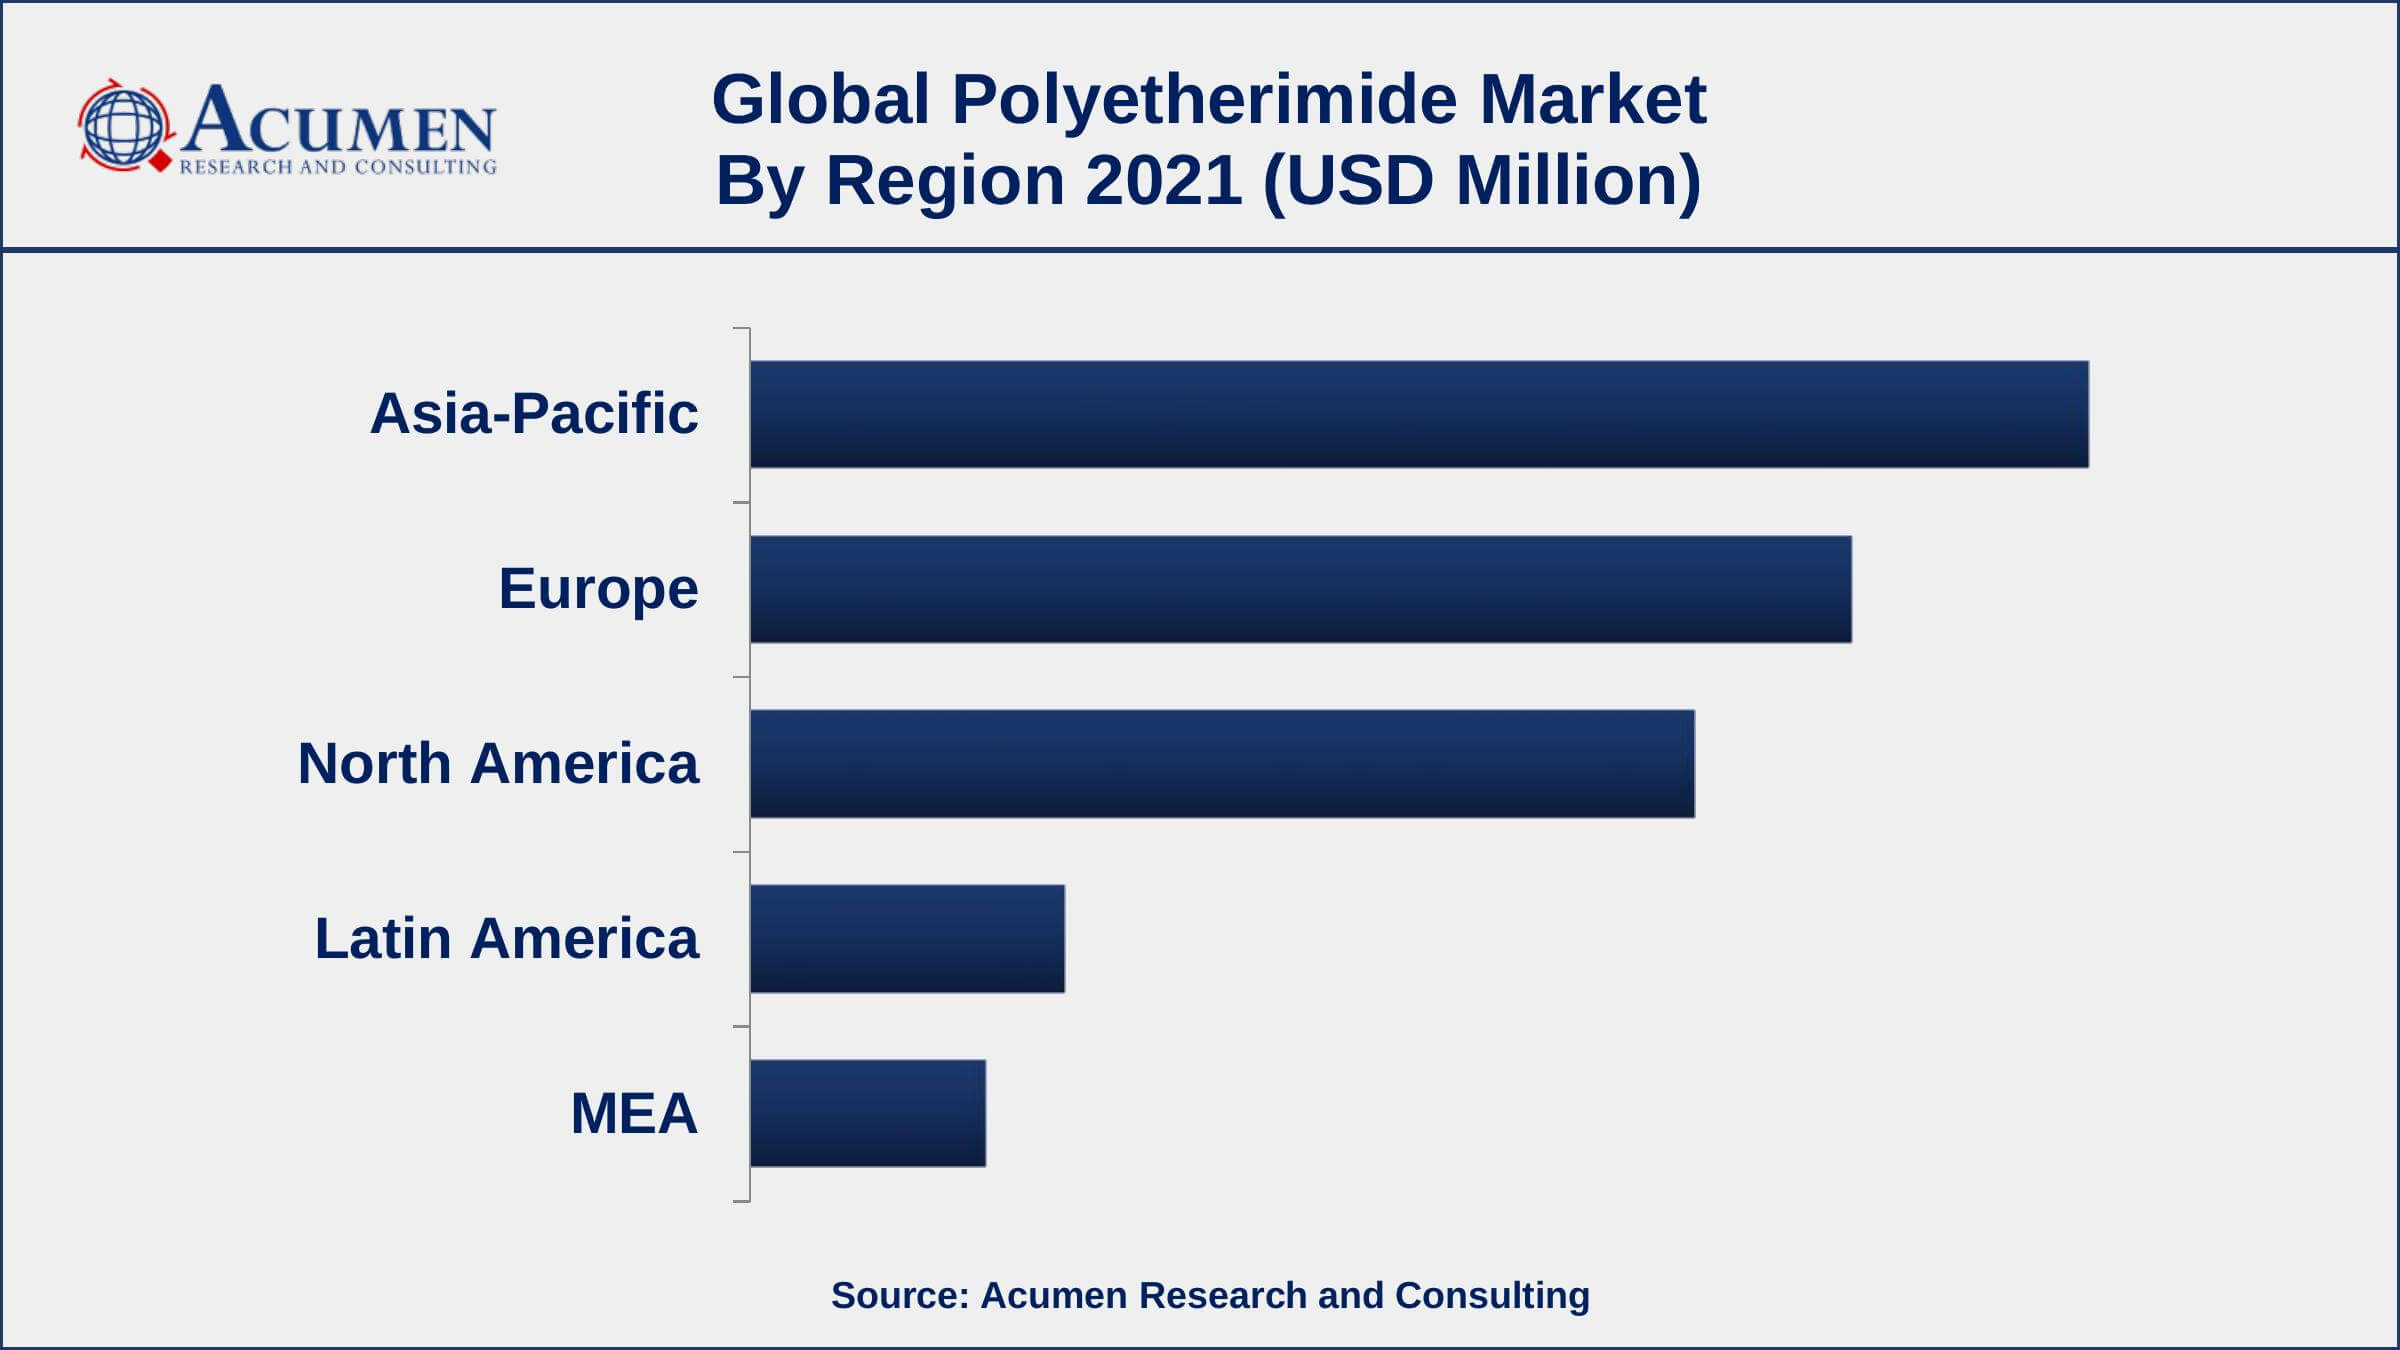 Growing demands from the transportation industry, drives the polyetherimide market size